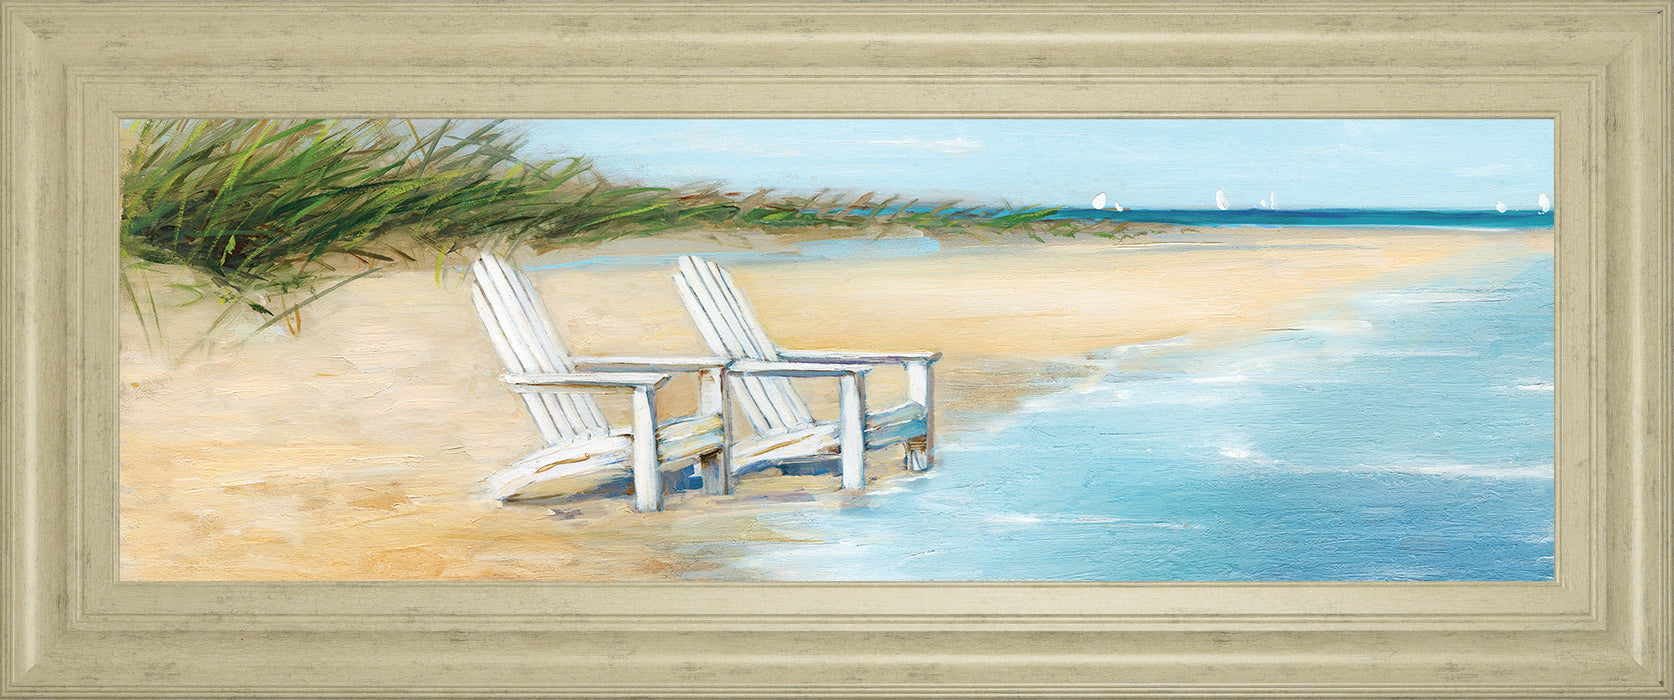 Water View Il By Sally Swatland - Framed Print Wall Art - Blue